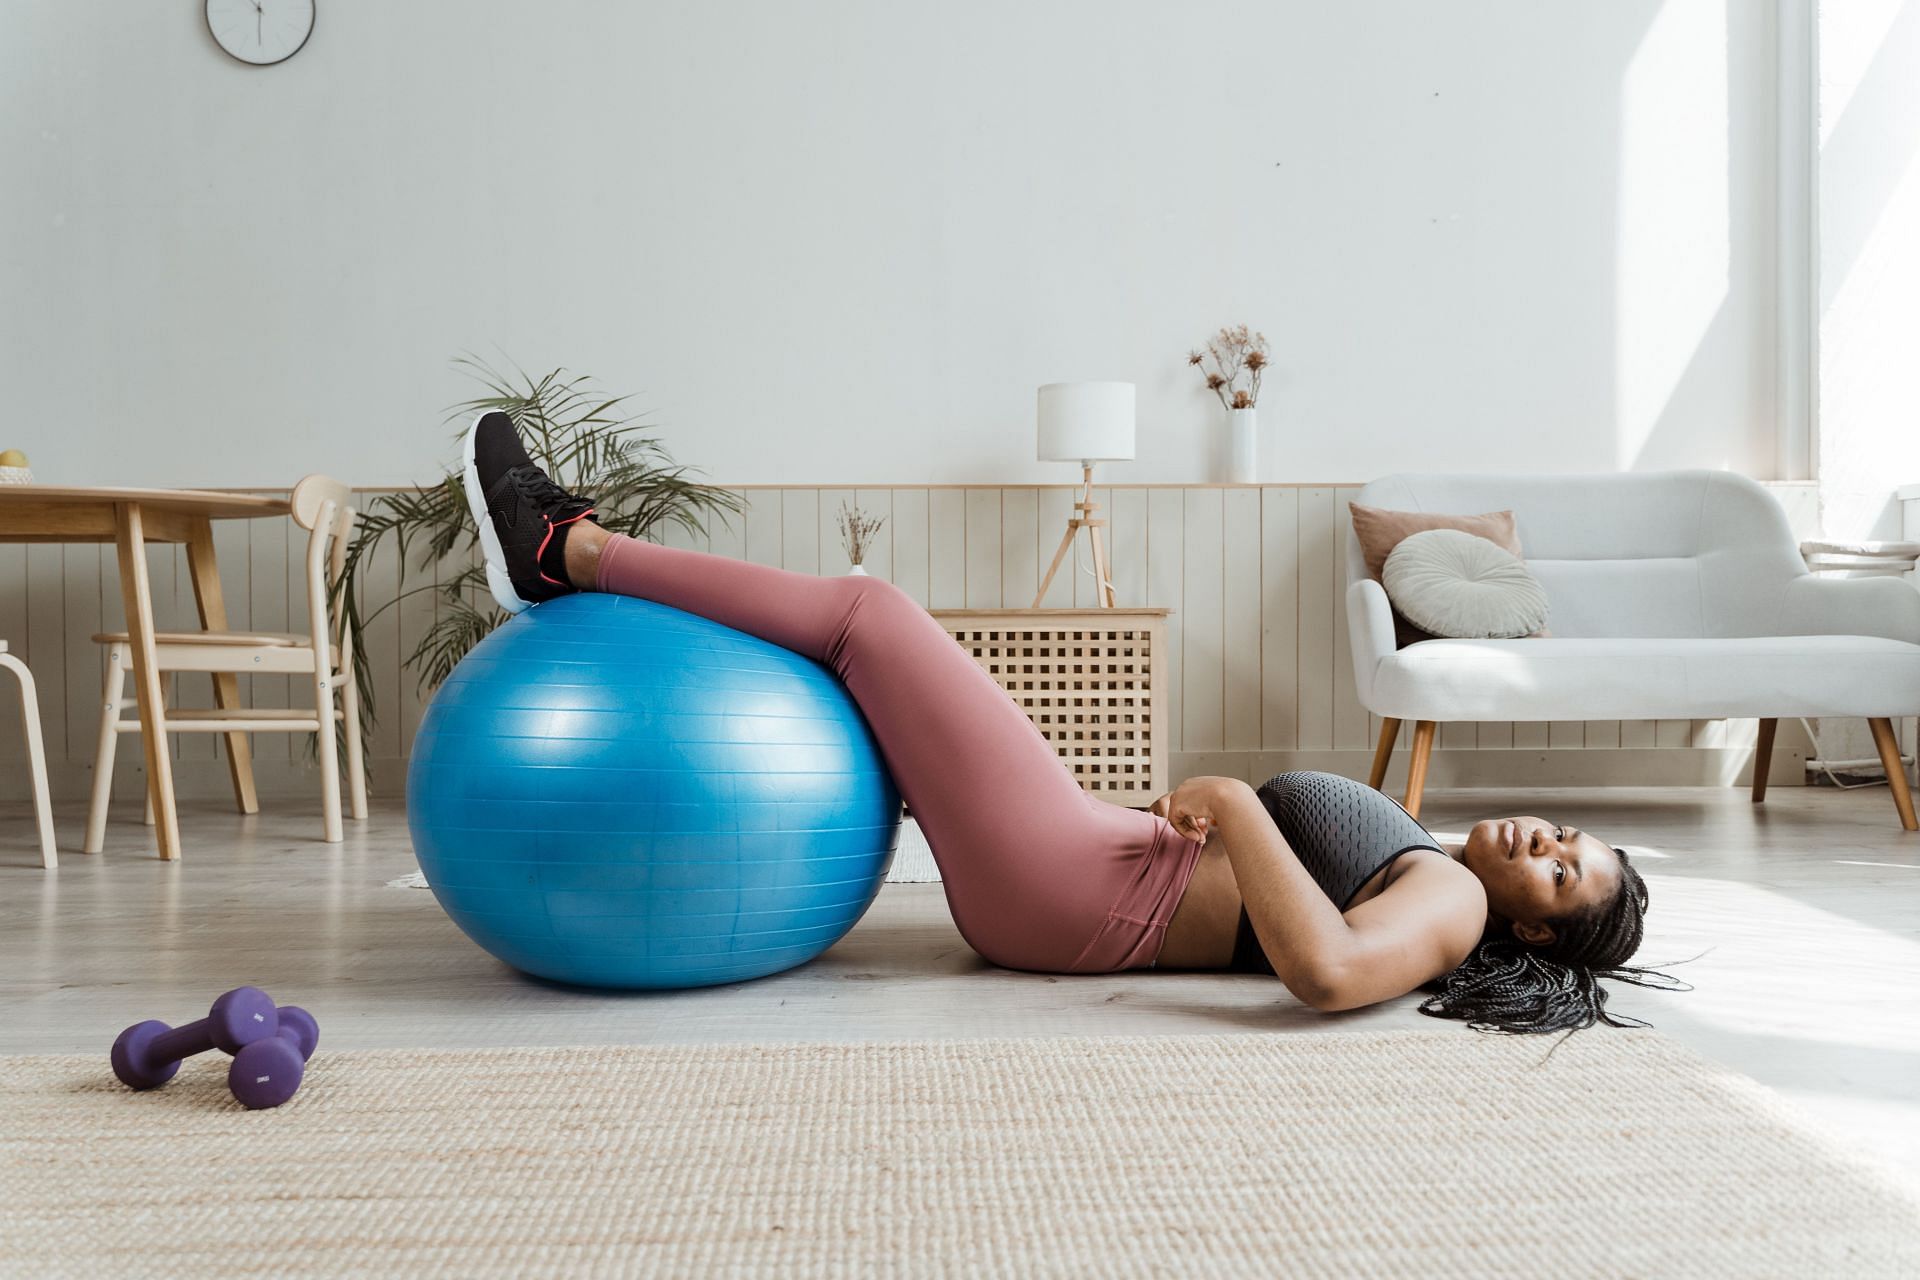 Stability ball exercise (Image via Pexels/MART Productions)